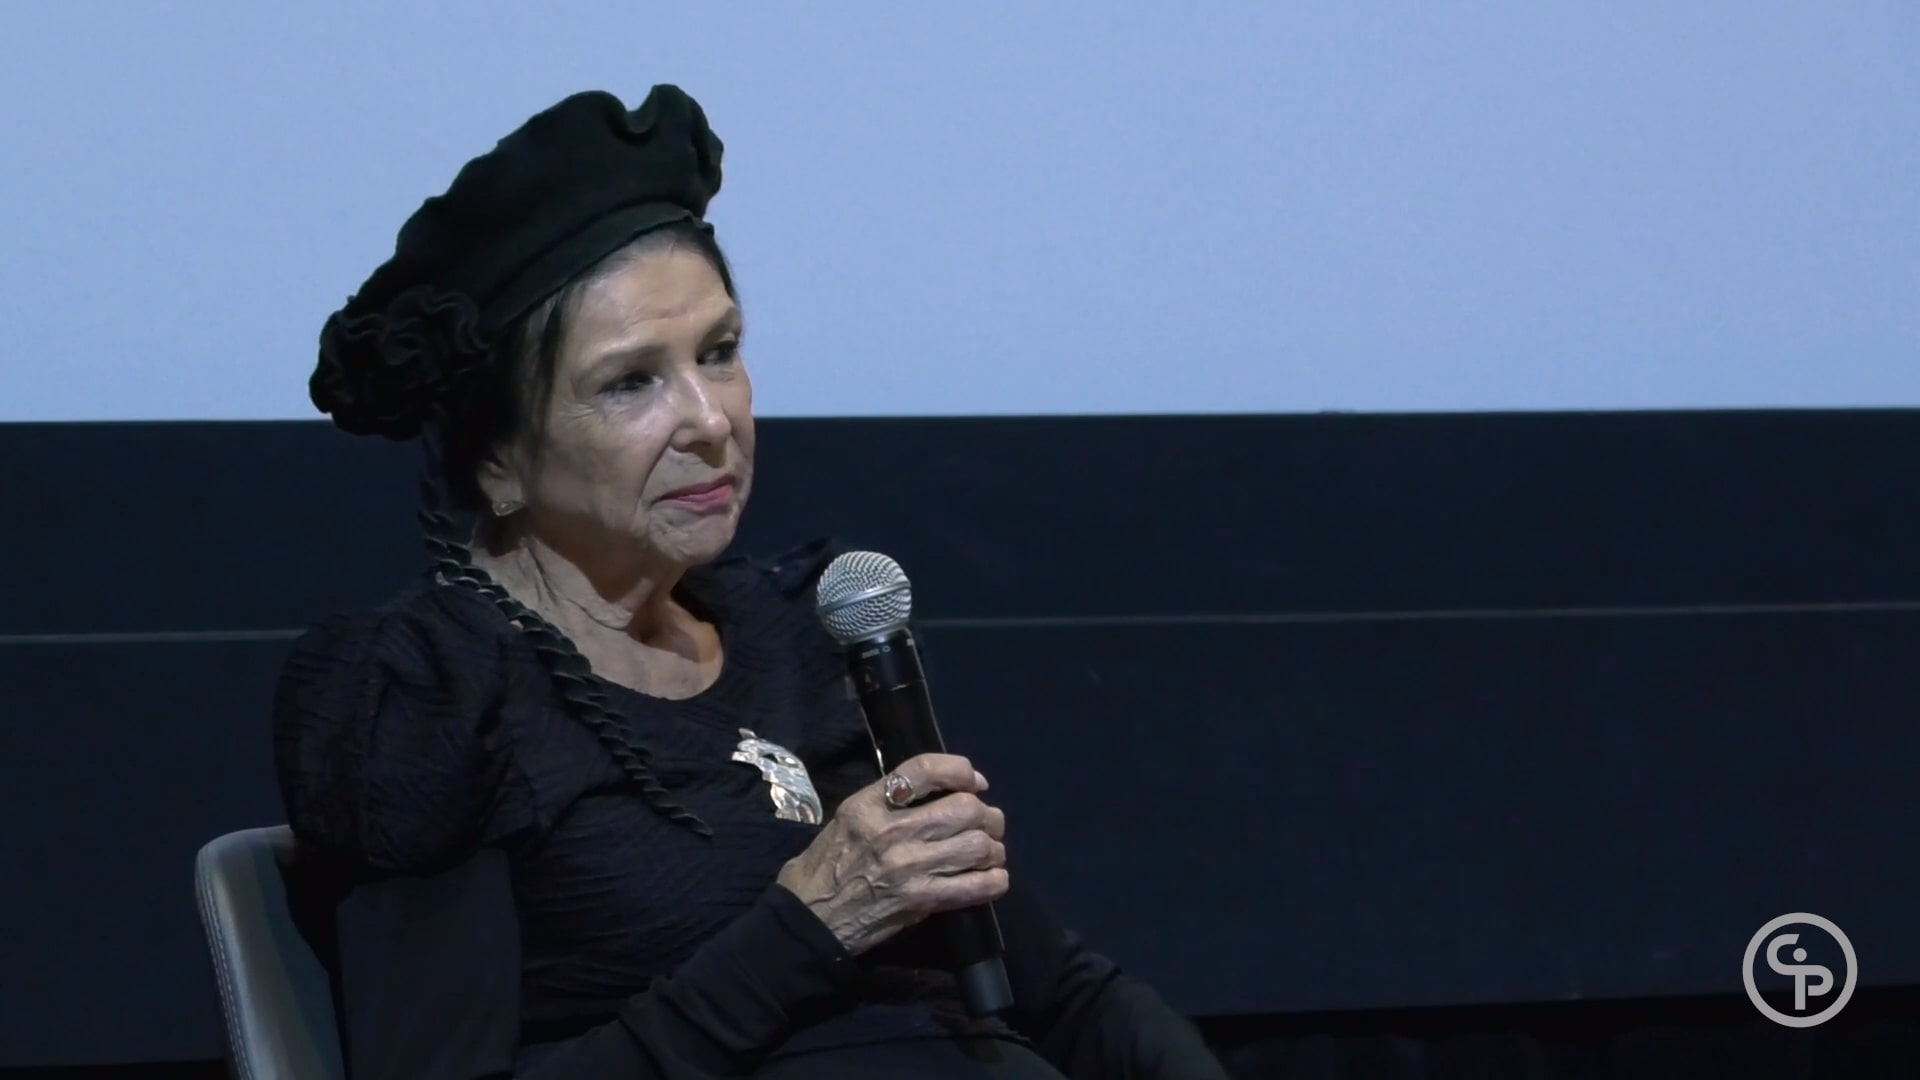 Still from Q&A with Alanis Obomsawin - MERATA